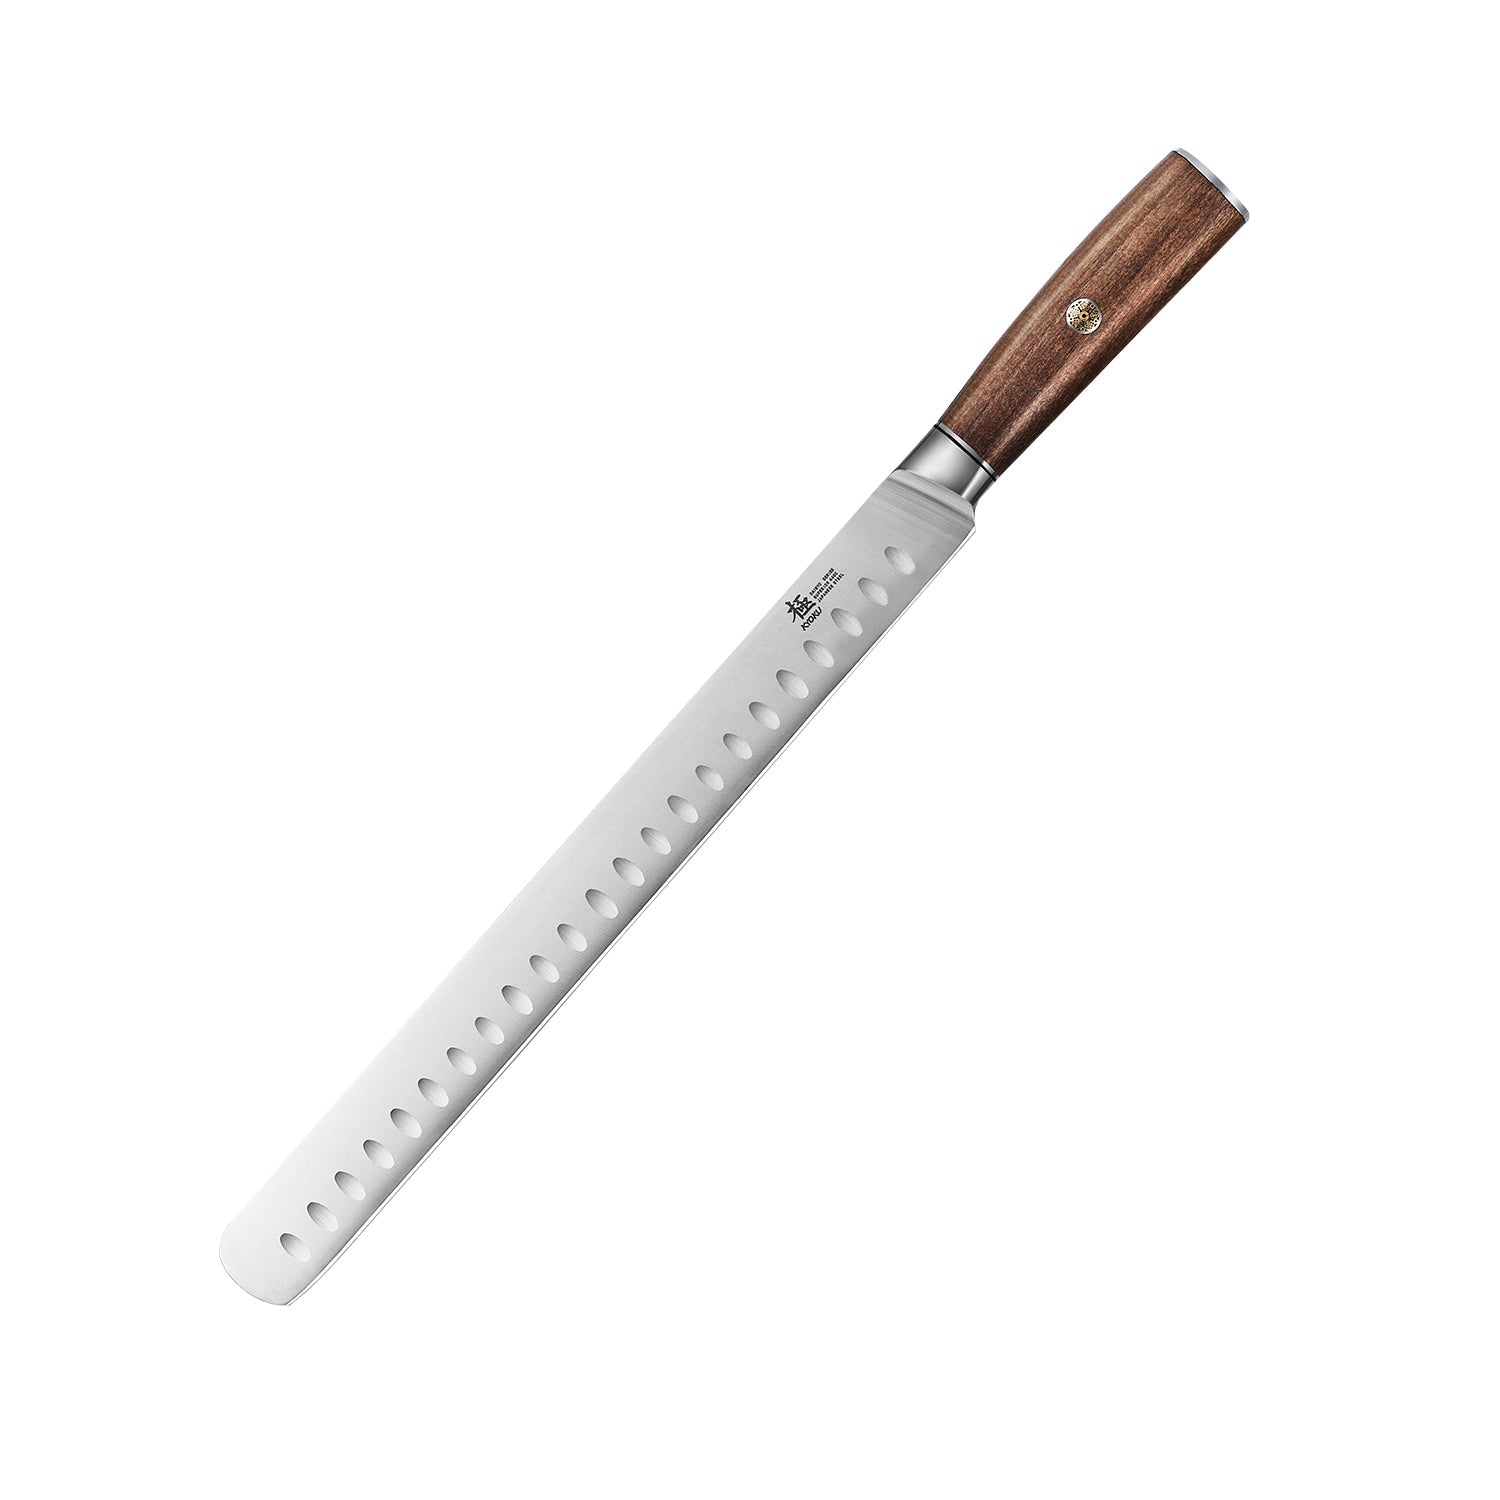 KYOKU Gin Series 12 Brisket Slicing Knife, Meat Carving Knife with Silver  PVD Coating Mosaic Pin Handle for Professional Chef & Home Cook, Japanese